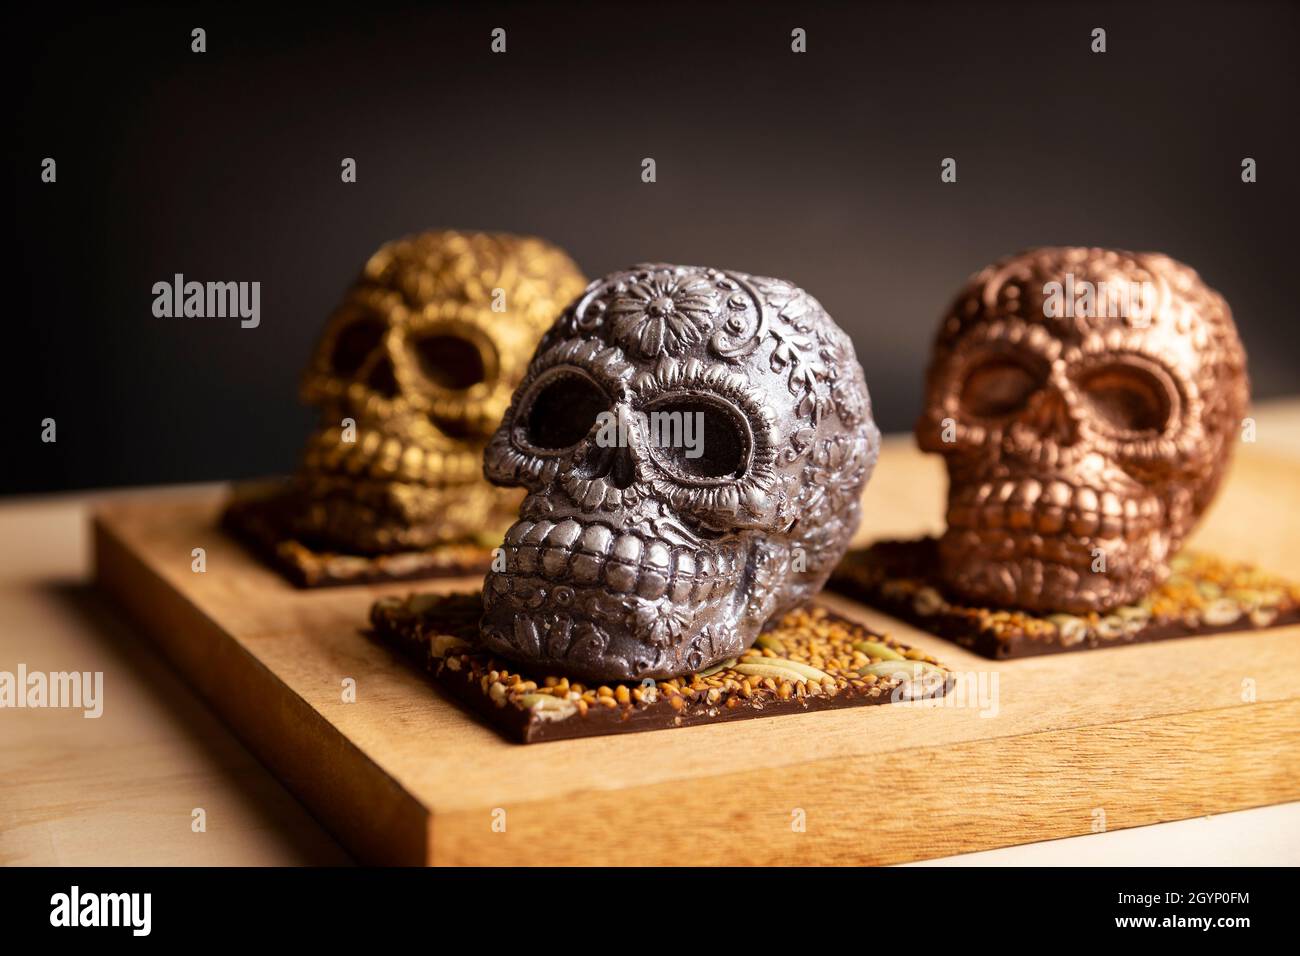 edible ornamented mexican skull made of chocolate gourmet, traditional gift for 'dia de muertos' day of the death in Mexico culture named 'calaverita Stock Photo